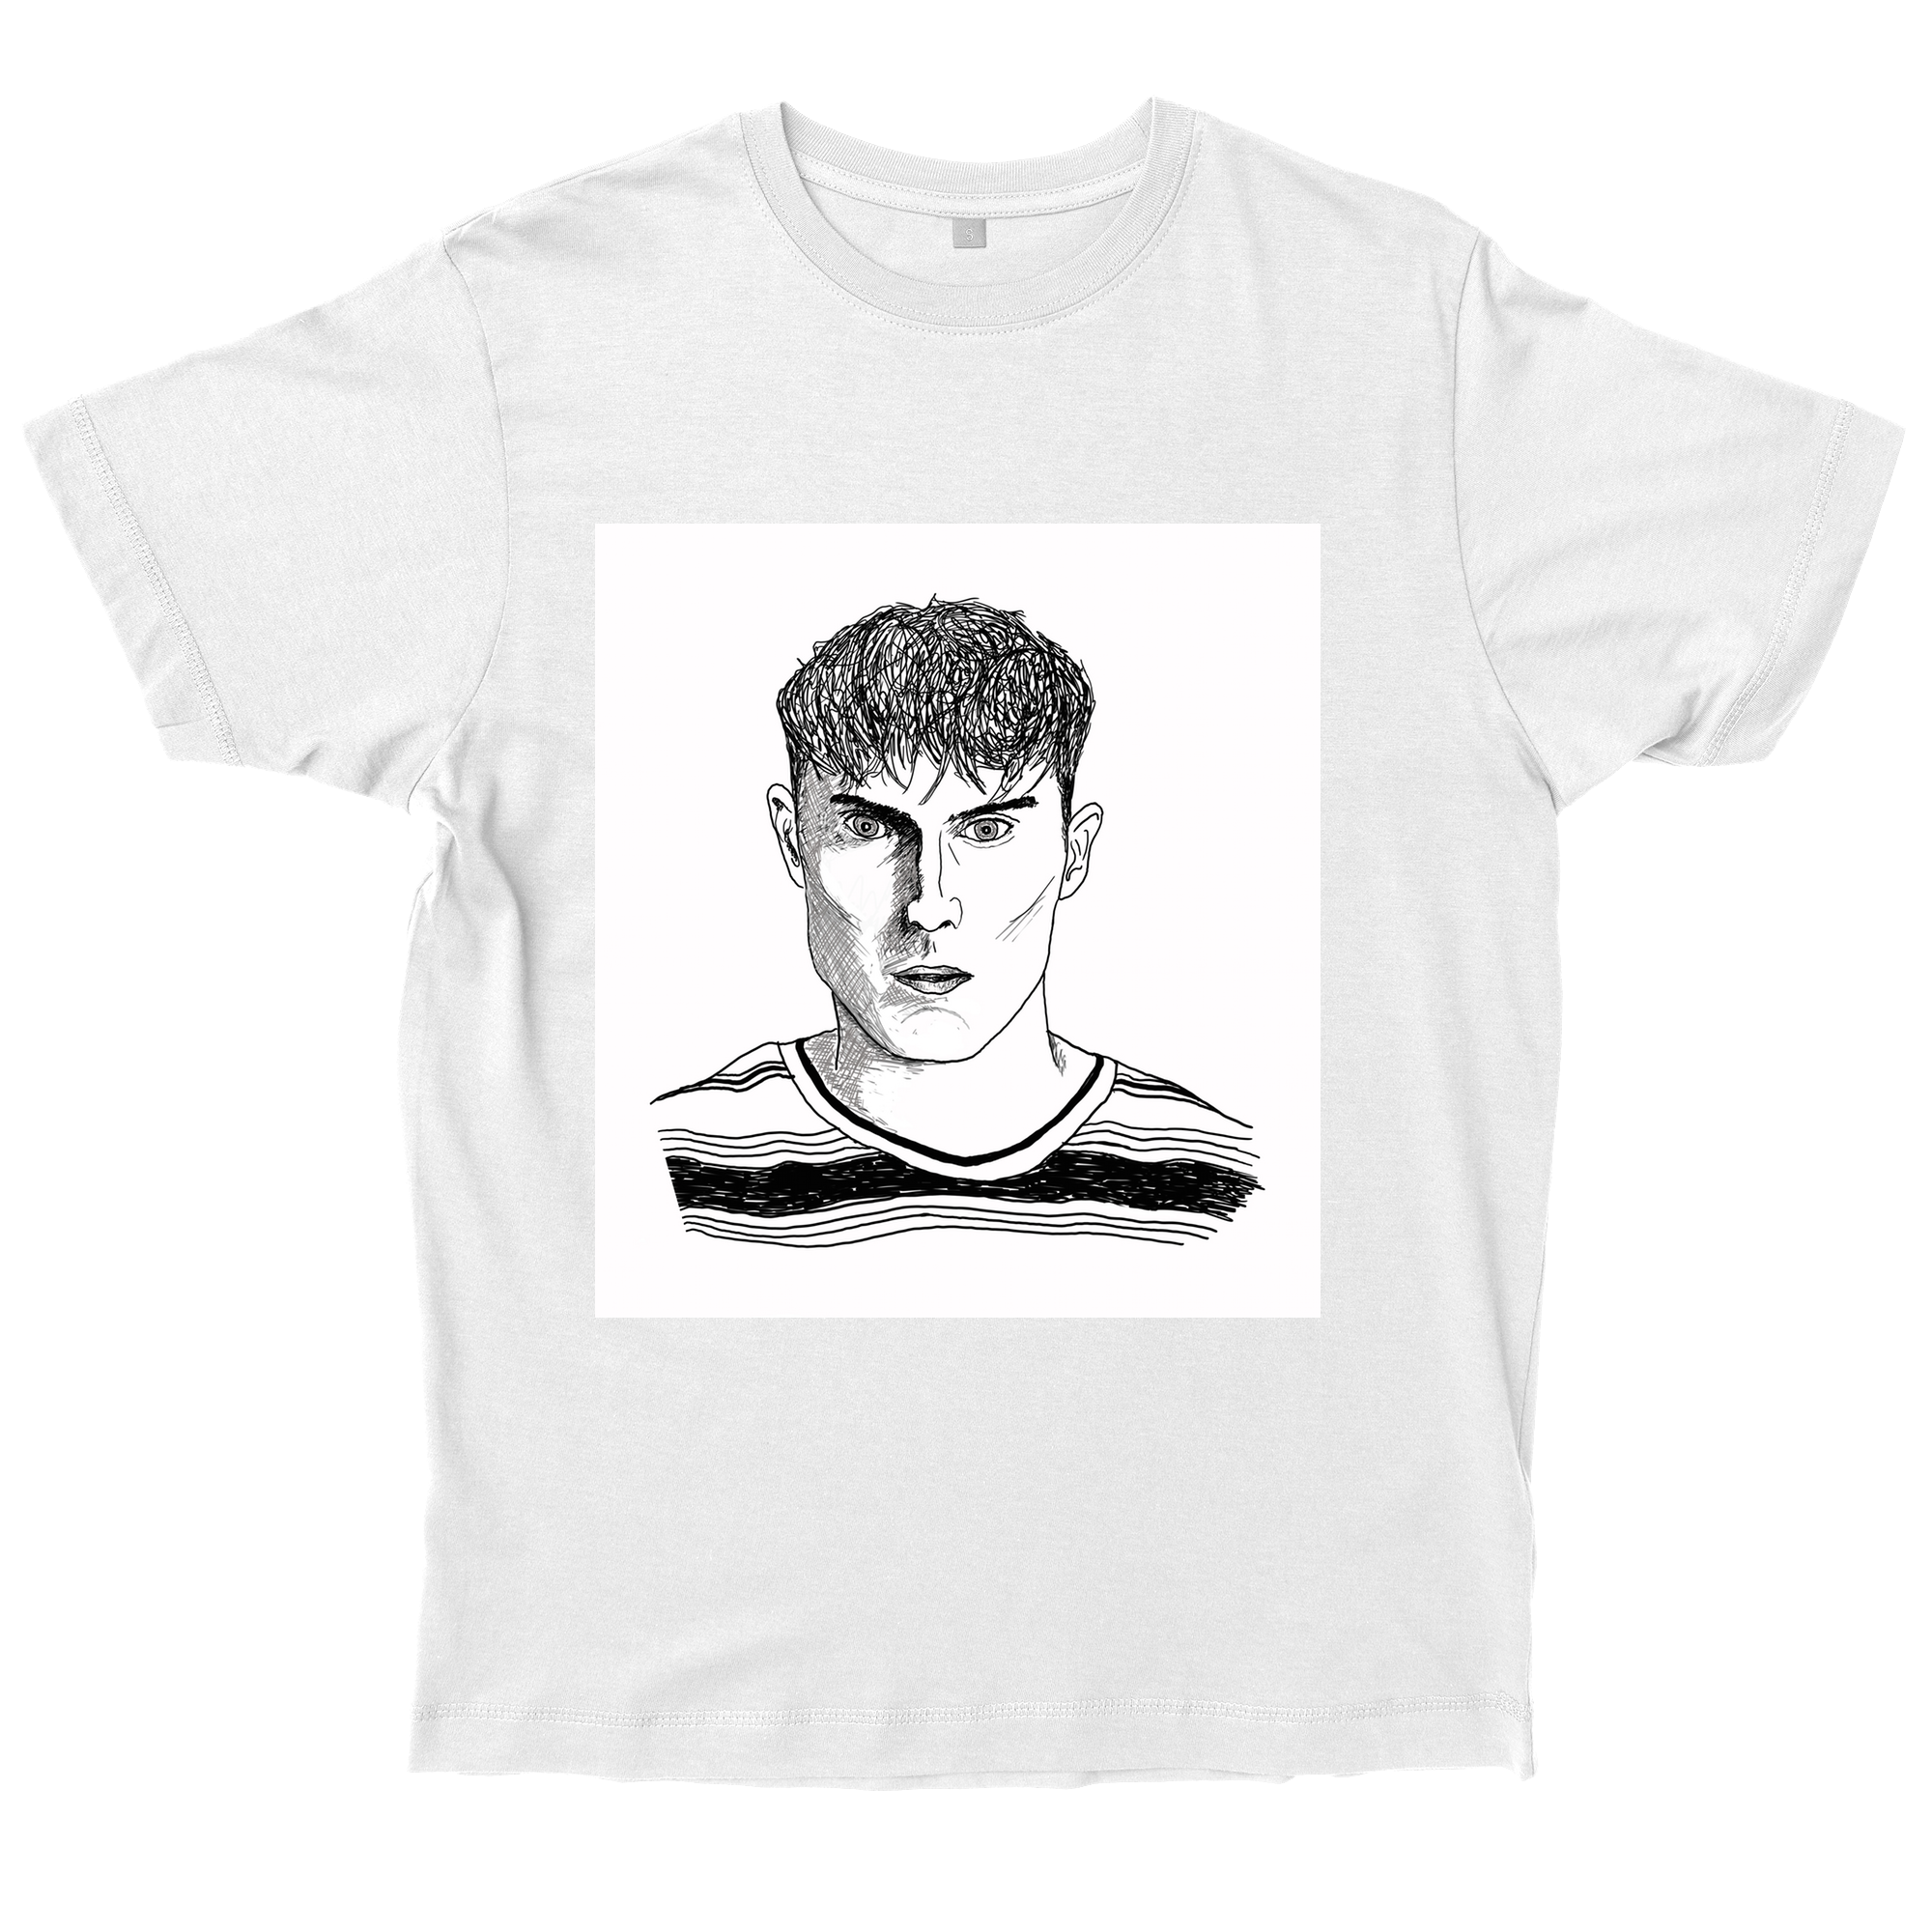 Rock Out with Fender: Official Sam Fender Merchandise Store